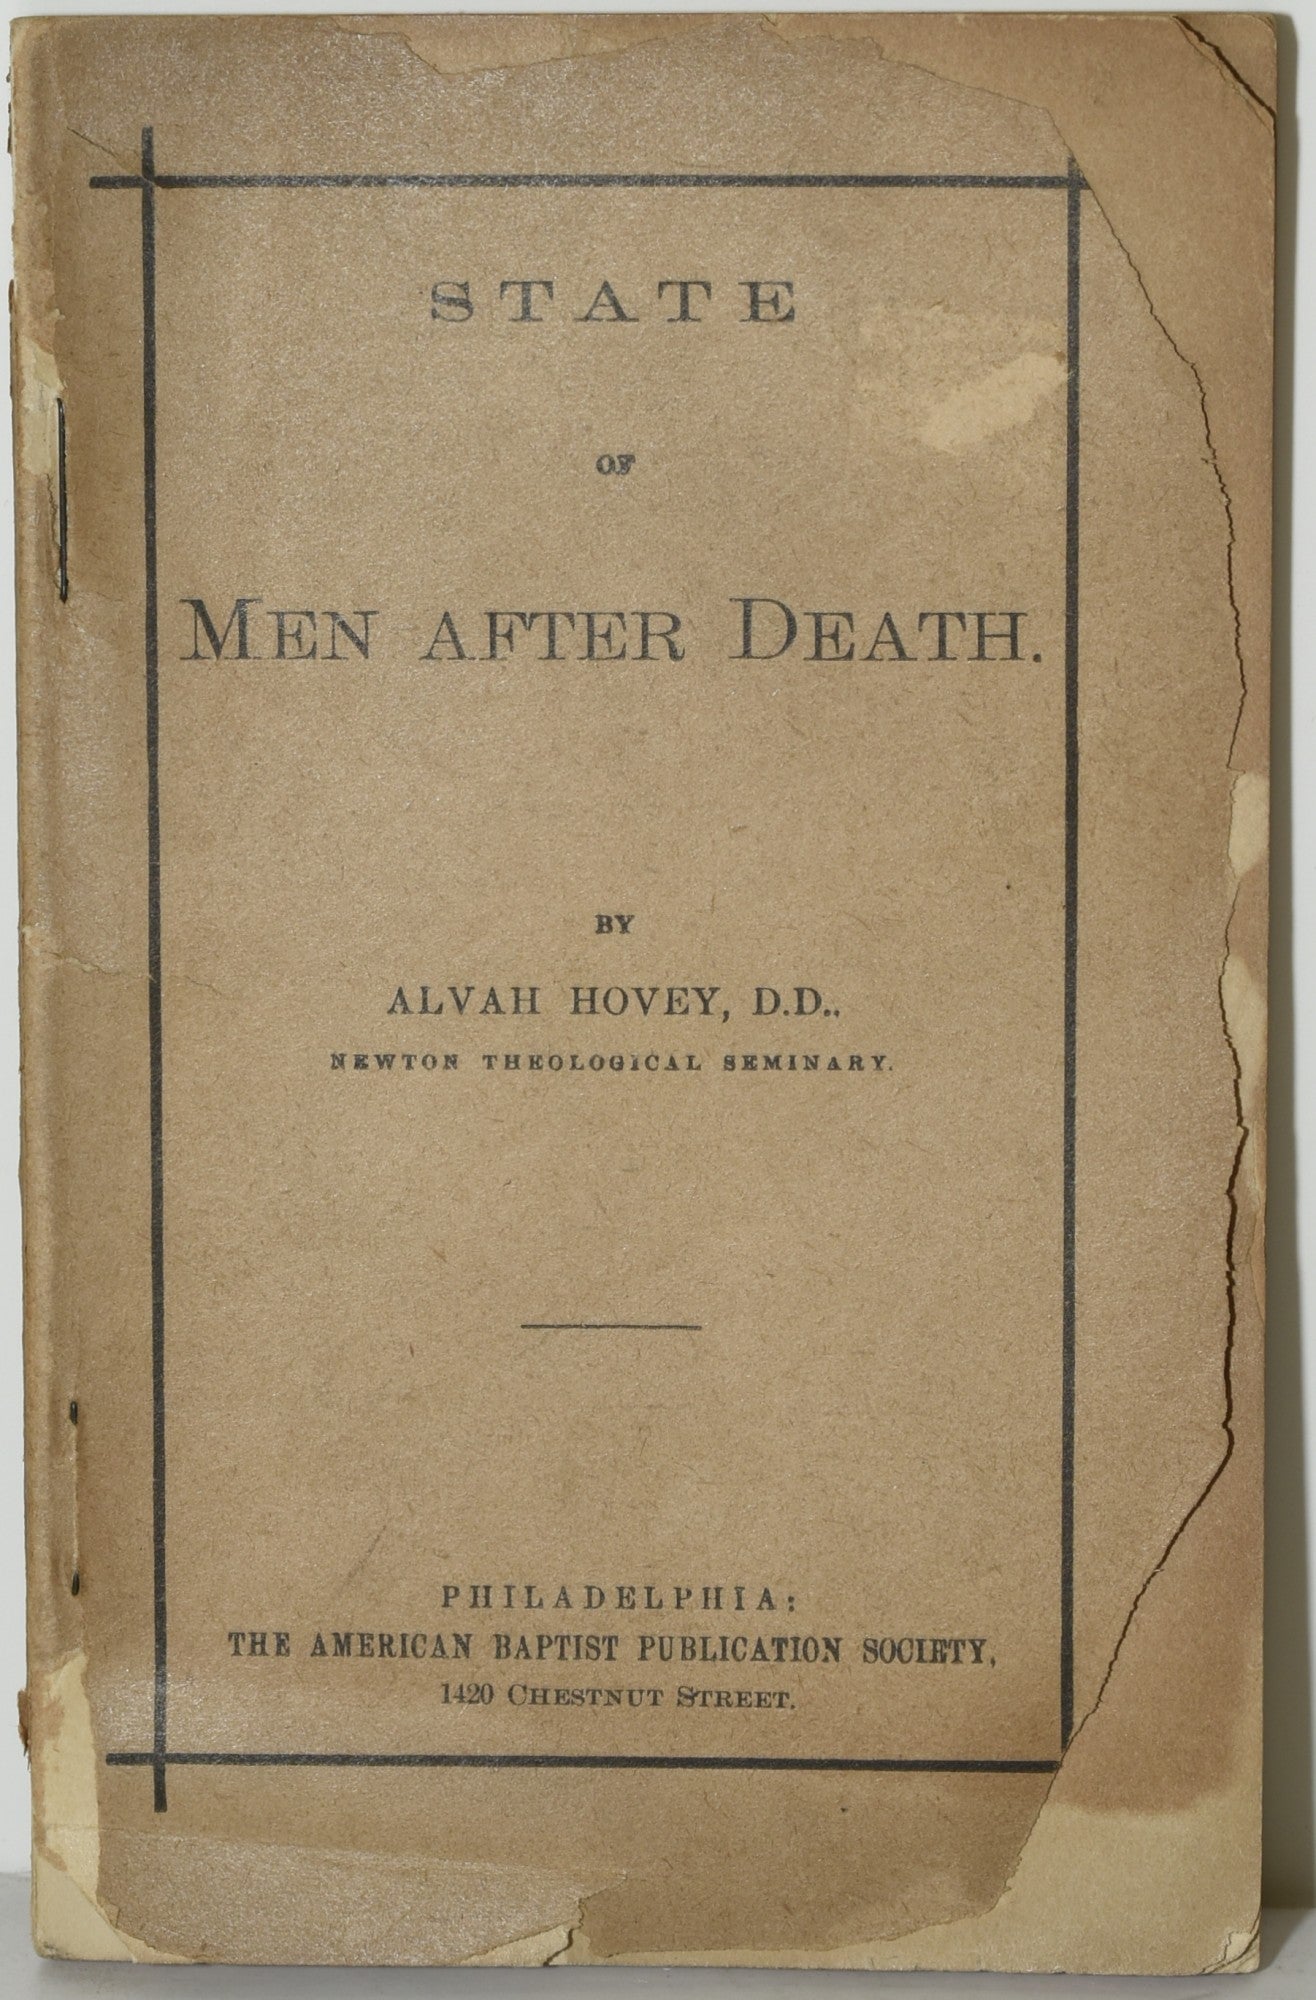 STATE OF MEN AFTER DEATH | Alvah Hovey